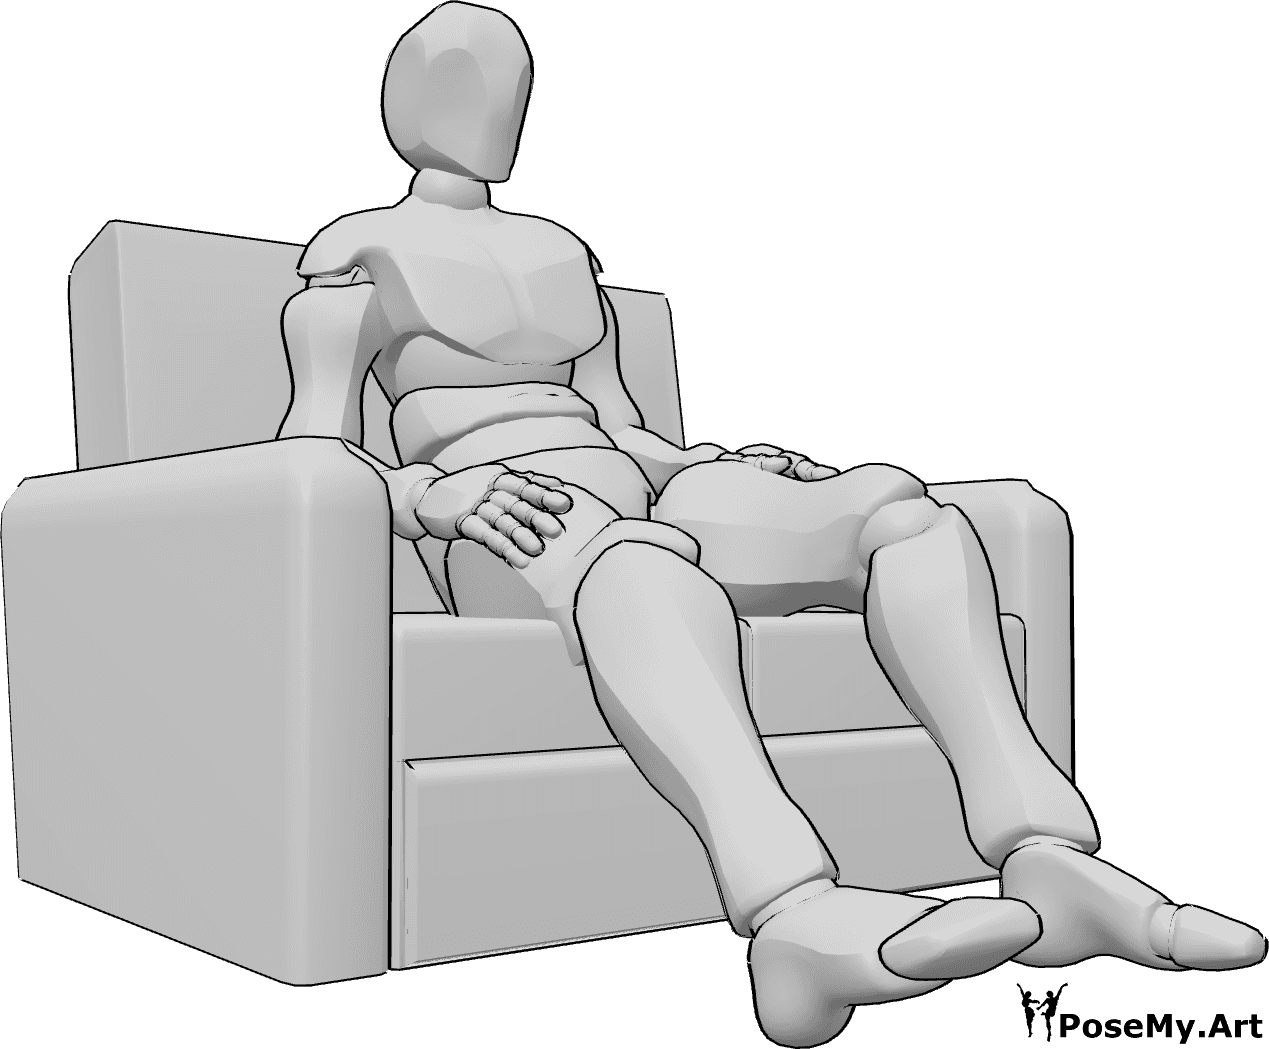 Pose Reference- Comfortable sitting pose - Male is sitting on the couch comfortably, his both hands are in his pockets